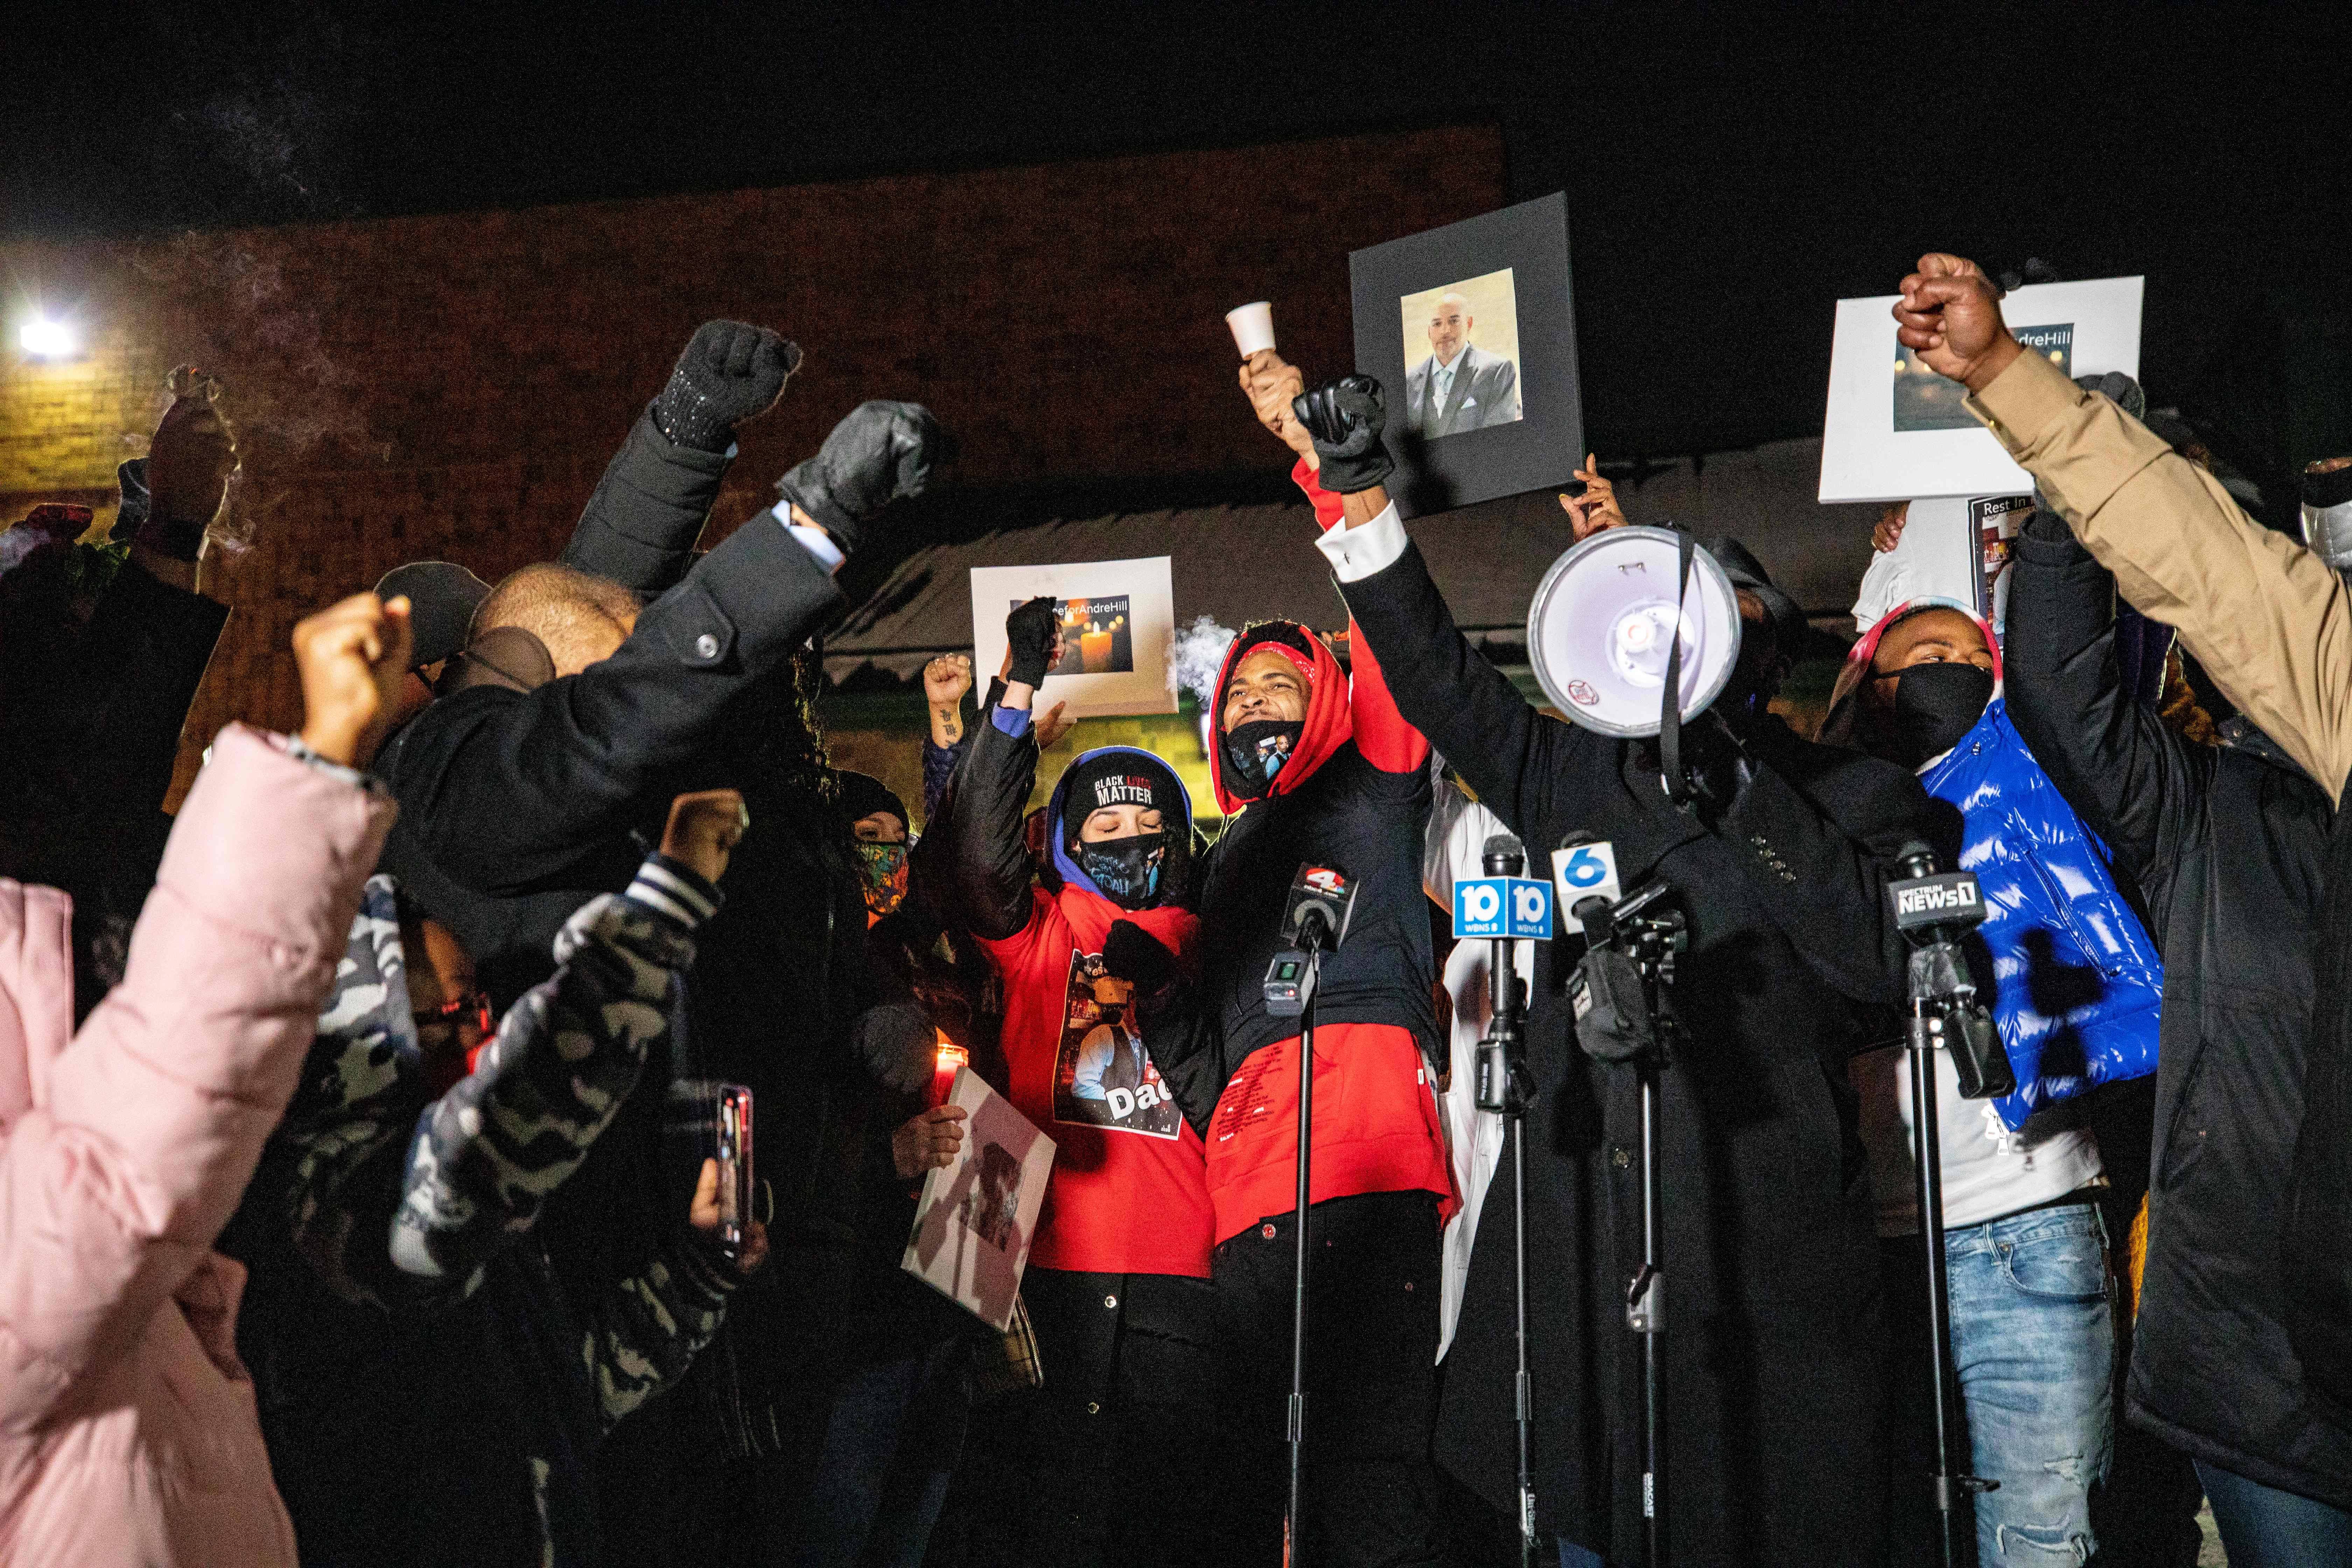 The crowd raises their fists around Hill's daughter Karissa Hill, and nephew Terry Fagain at a press conference and candlelight vigil for Andre Hill outside the Brentnell Community Recreation Center in Columbus, Ohio on December 26, 2020. - The fatal shooting of an unarmed Black man by police in  Columbus, Ohio -- the US city's second such killing this month -- sparked a fresh wave of protests on December 24 against racial injustice and police brutality in the country. Andre Maurice Hill, 47, was in the garage of a house on the night of December 21 when he was shot several times by a police officer who had been called to the scene for a minor incident. (Photo by STEPHEN ZENNER / AFP) (Photo by STEPHEN ZENNER/AFP via Getty Images)